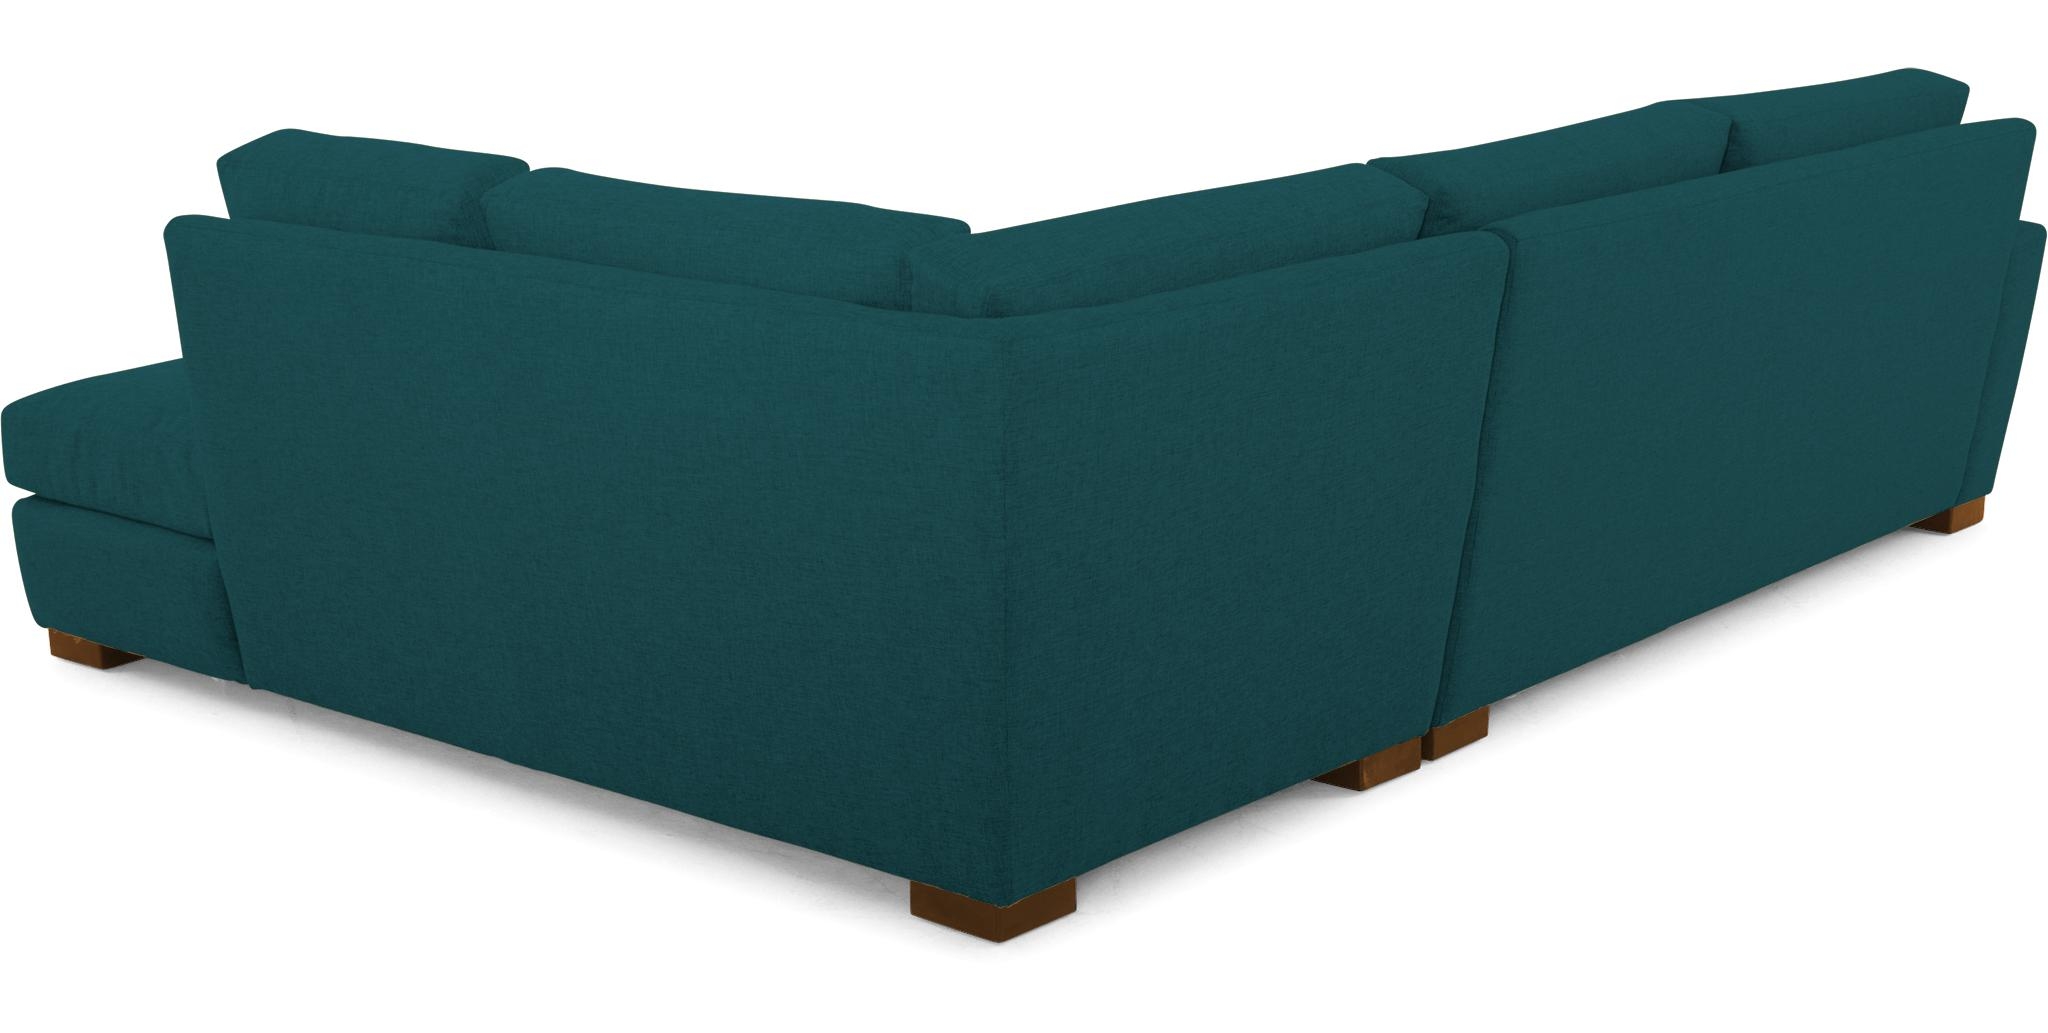 Blue Anton Mid Century Modern Sectional with Bumper - Royale Peacock - Mocha - Right  - Image 4